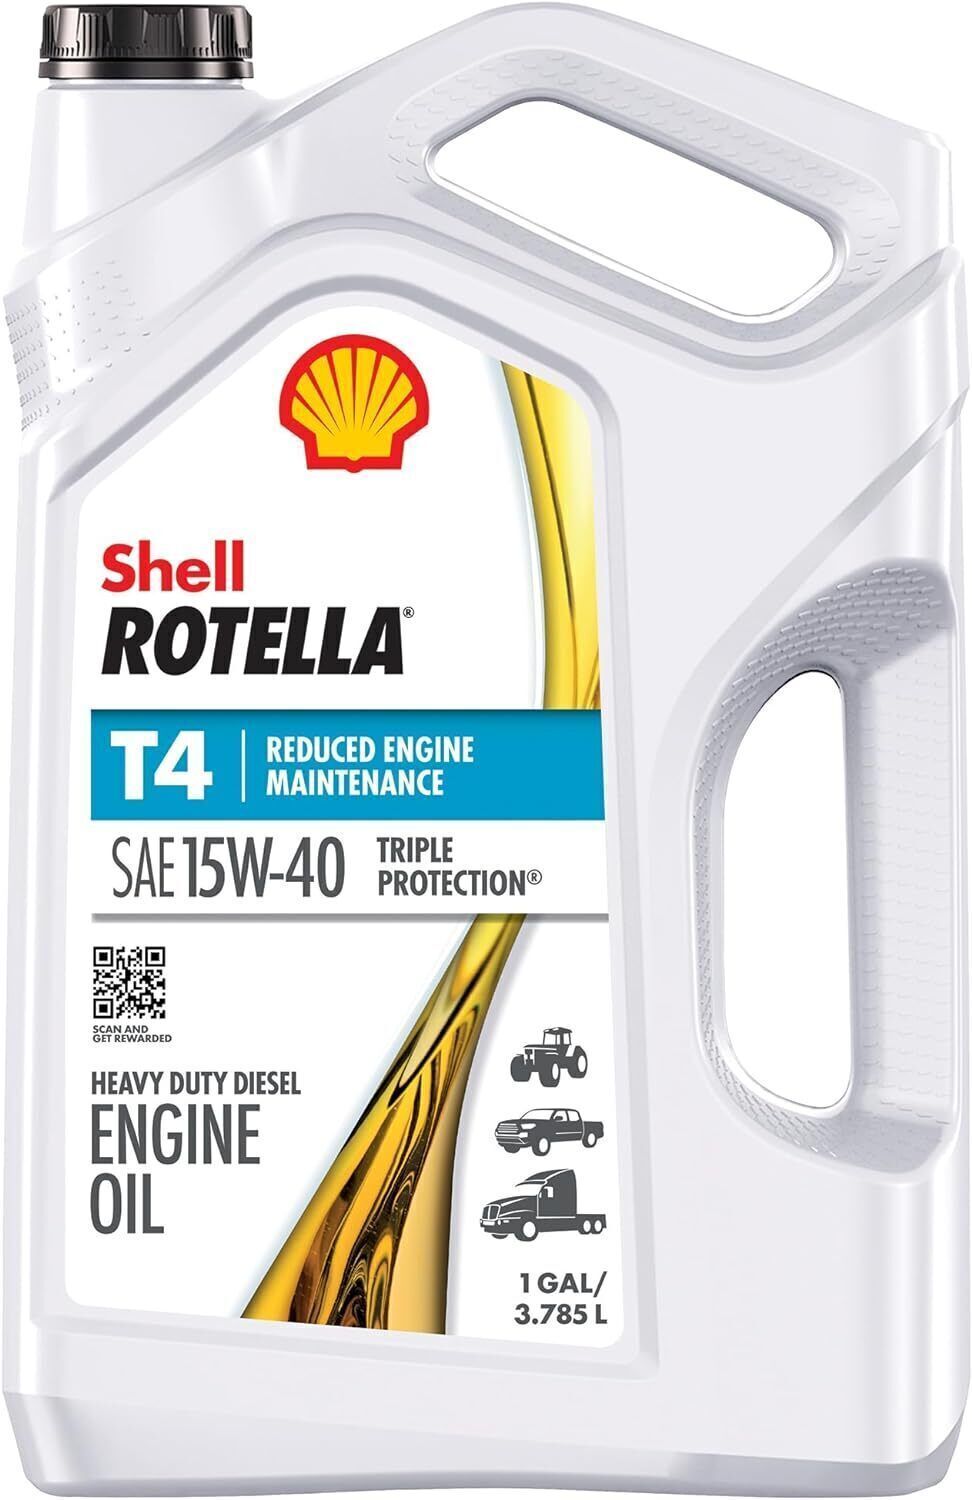 Shell Rotella T4 Full Synthetic 15W-40 Diesel Engine Oil (1 Gallon, Case of 3)